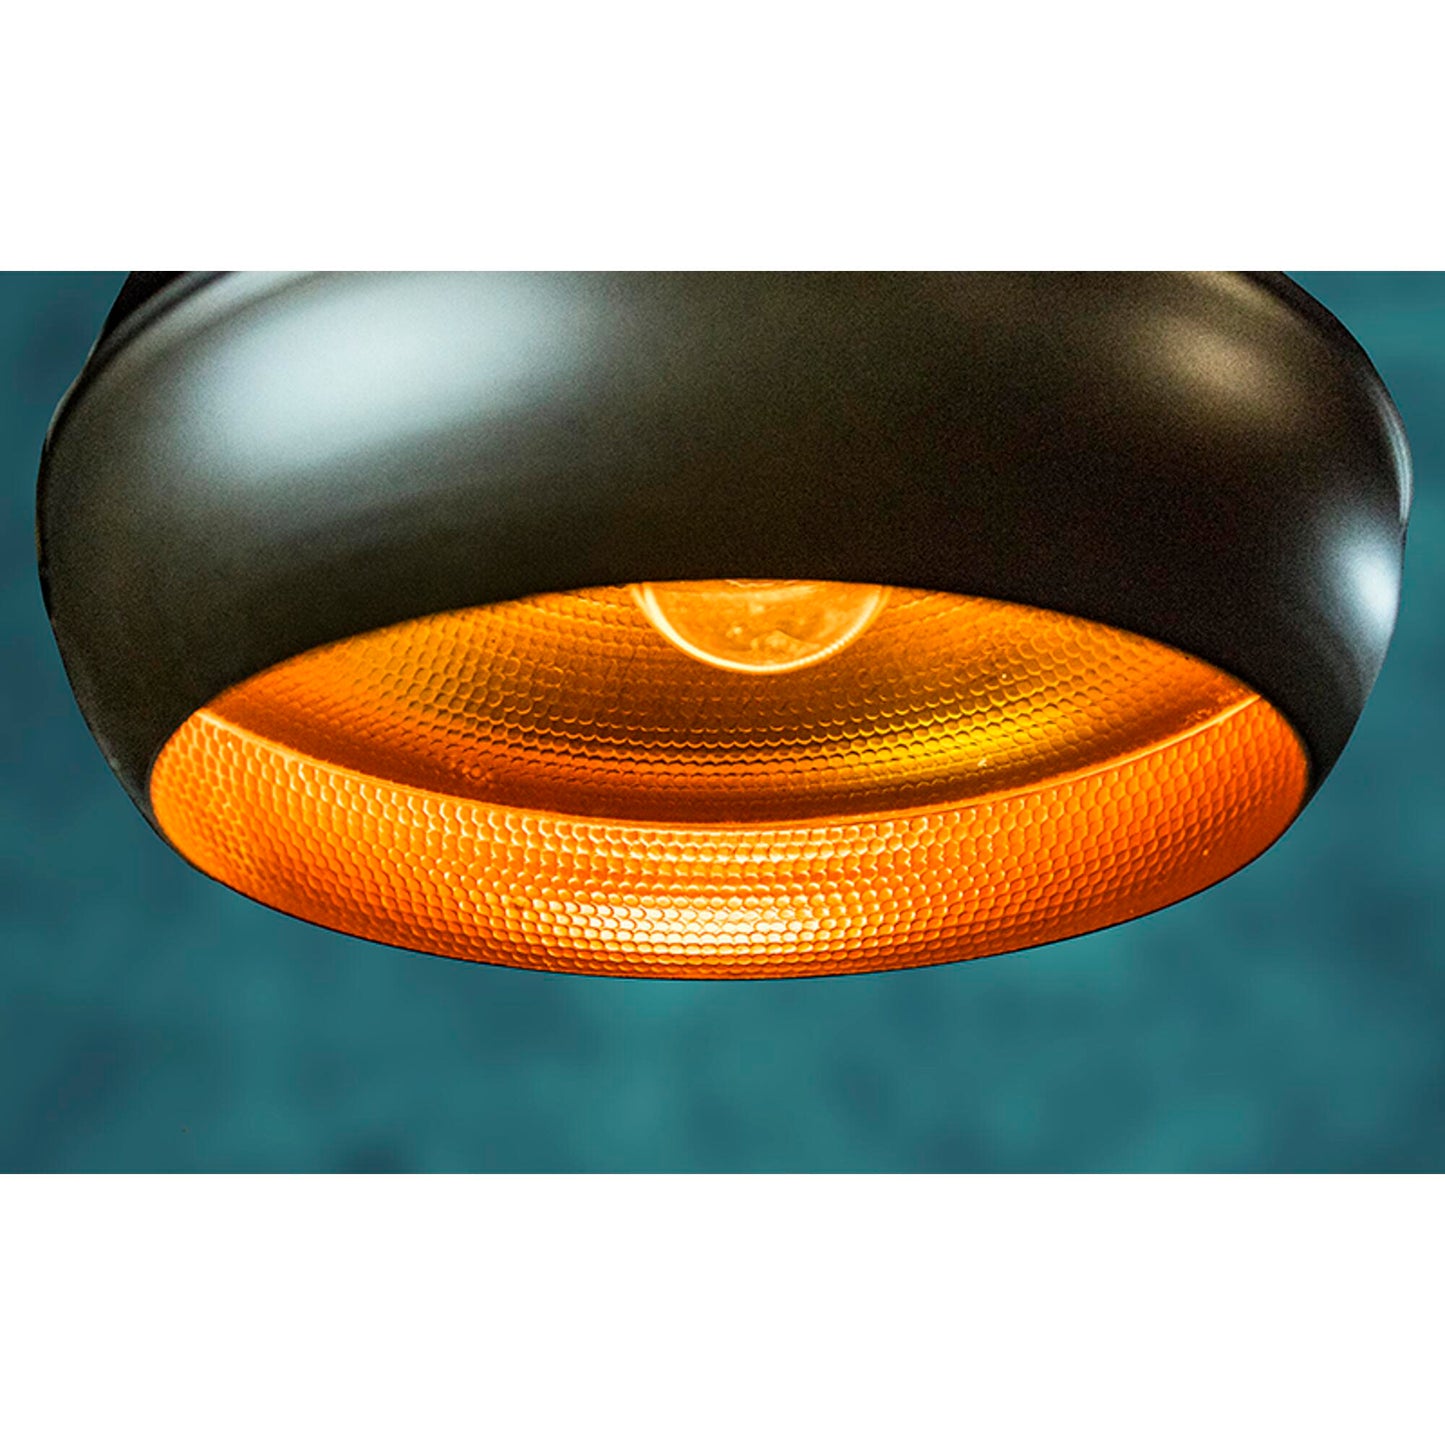 1-Light N N Pendant Oiled Bronze by Quorum. Classic Design Perfect for updating a kitchen island, over a bar, or adding a fresh look to a bathroom